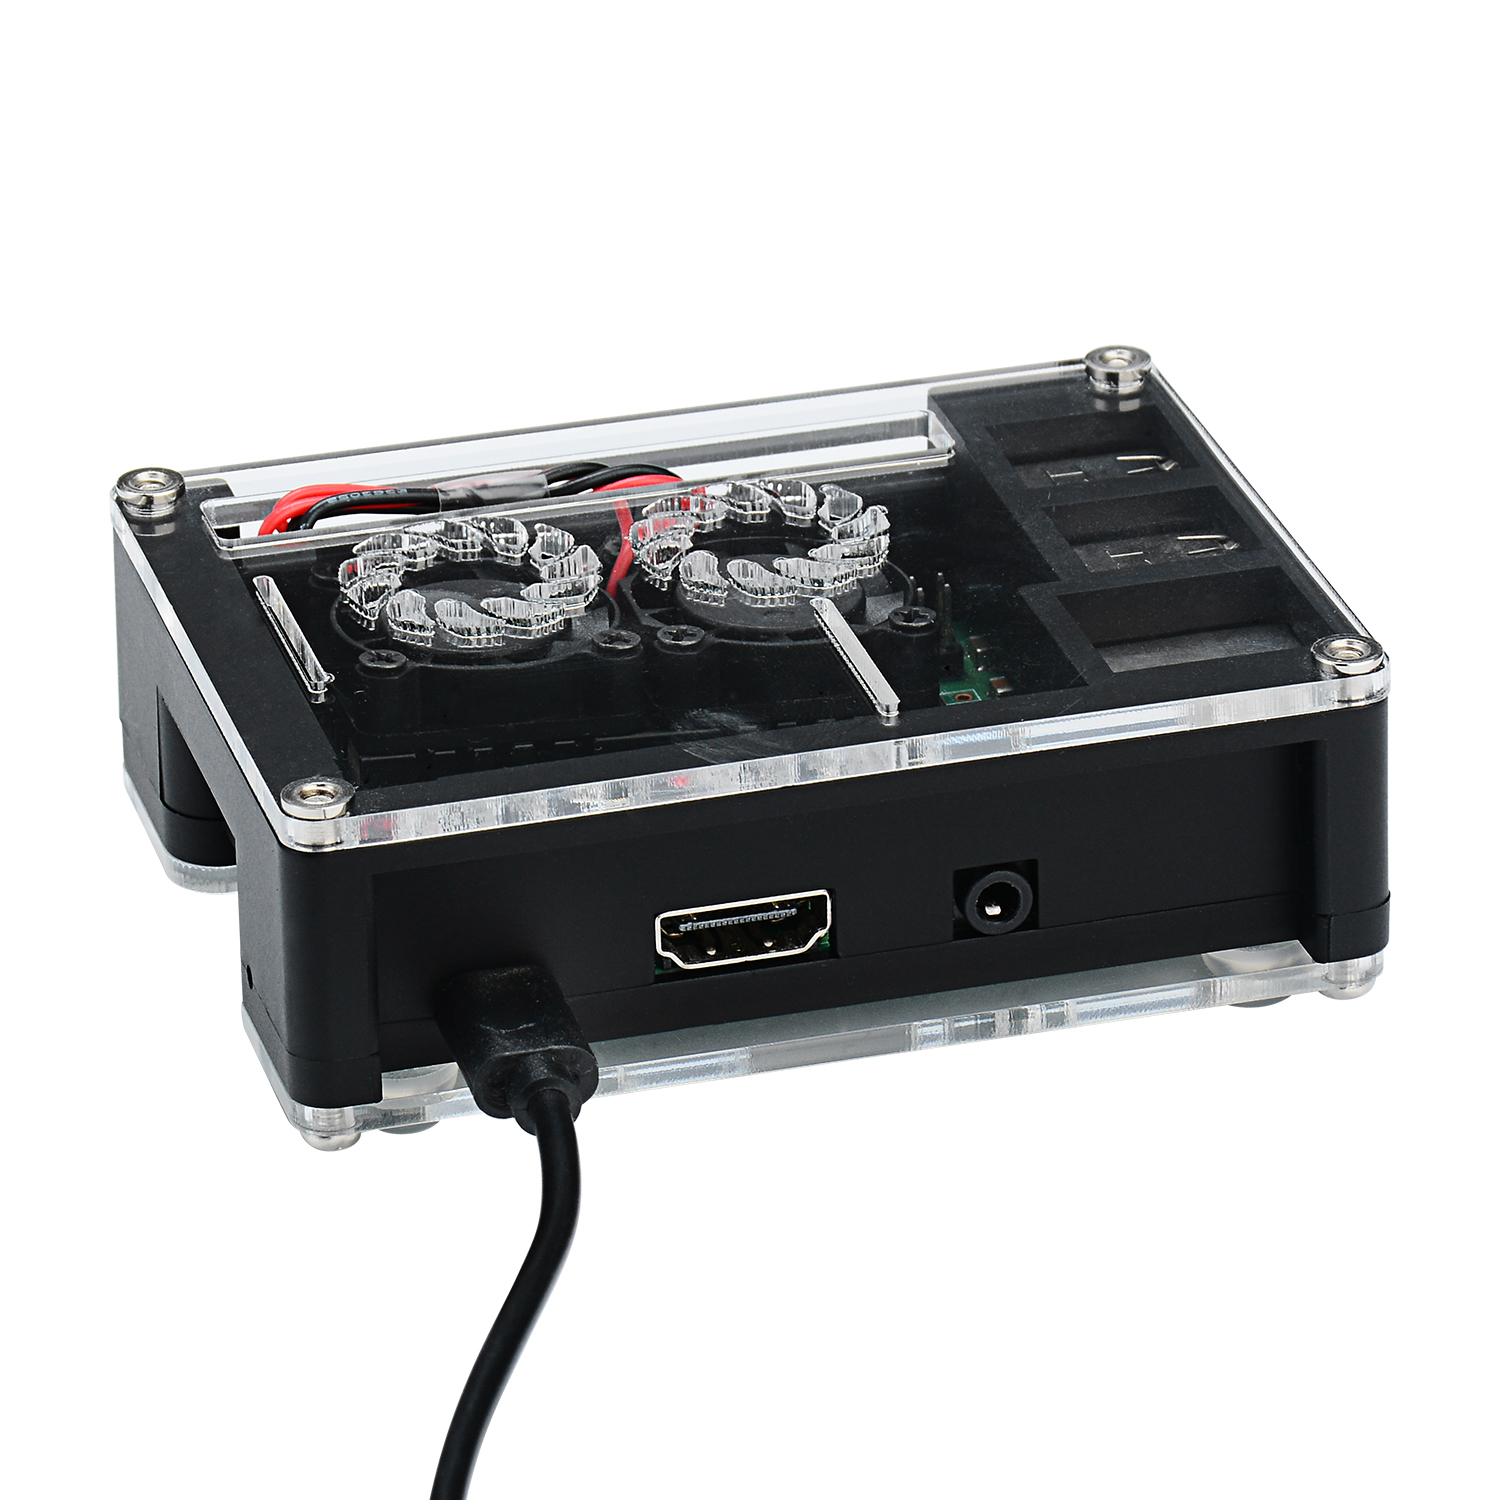 Black-Acrylic-Case-Support-Dual-Cooling-Fans-For-Raspberry-Pi-3B-Board-1411938-4